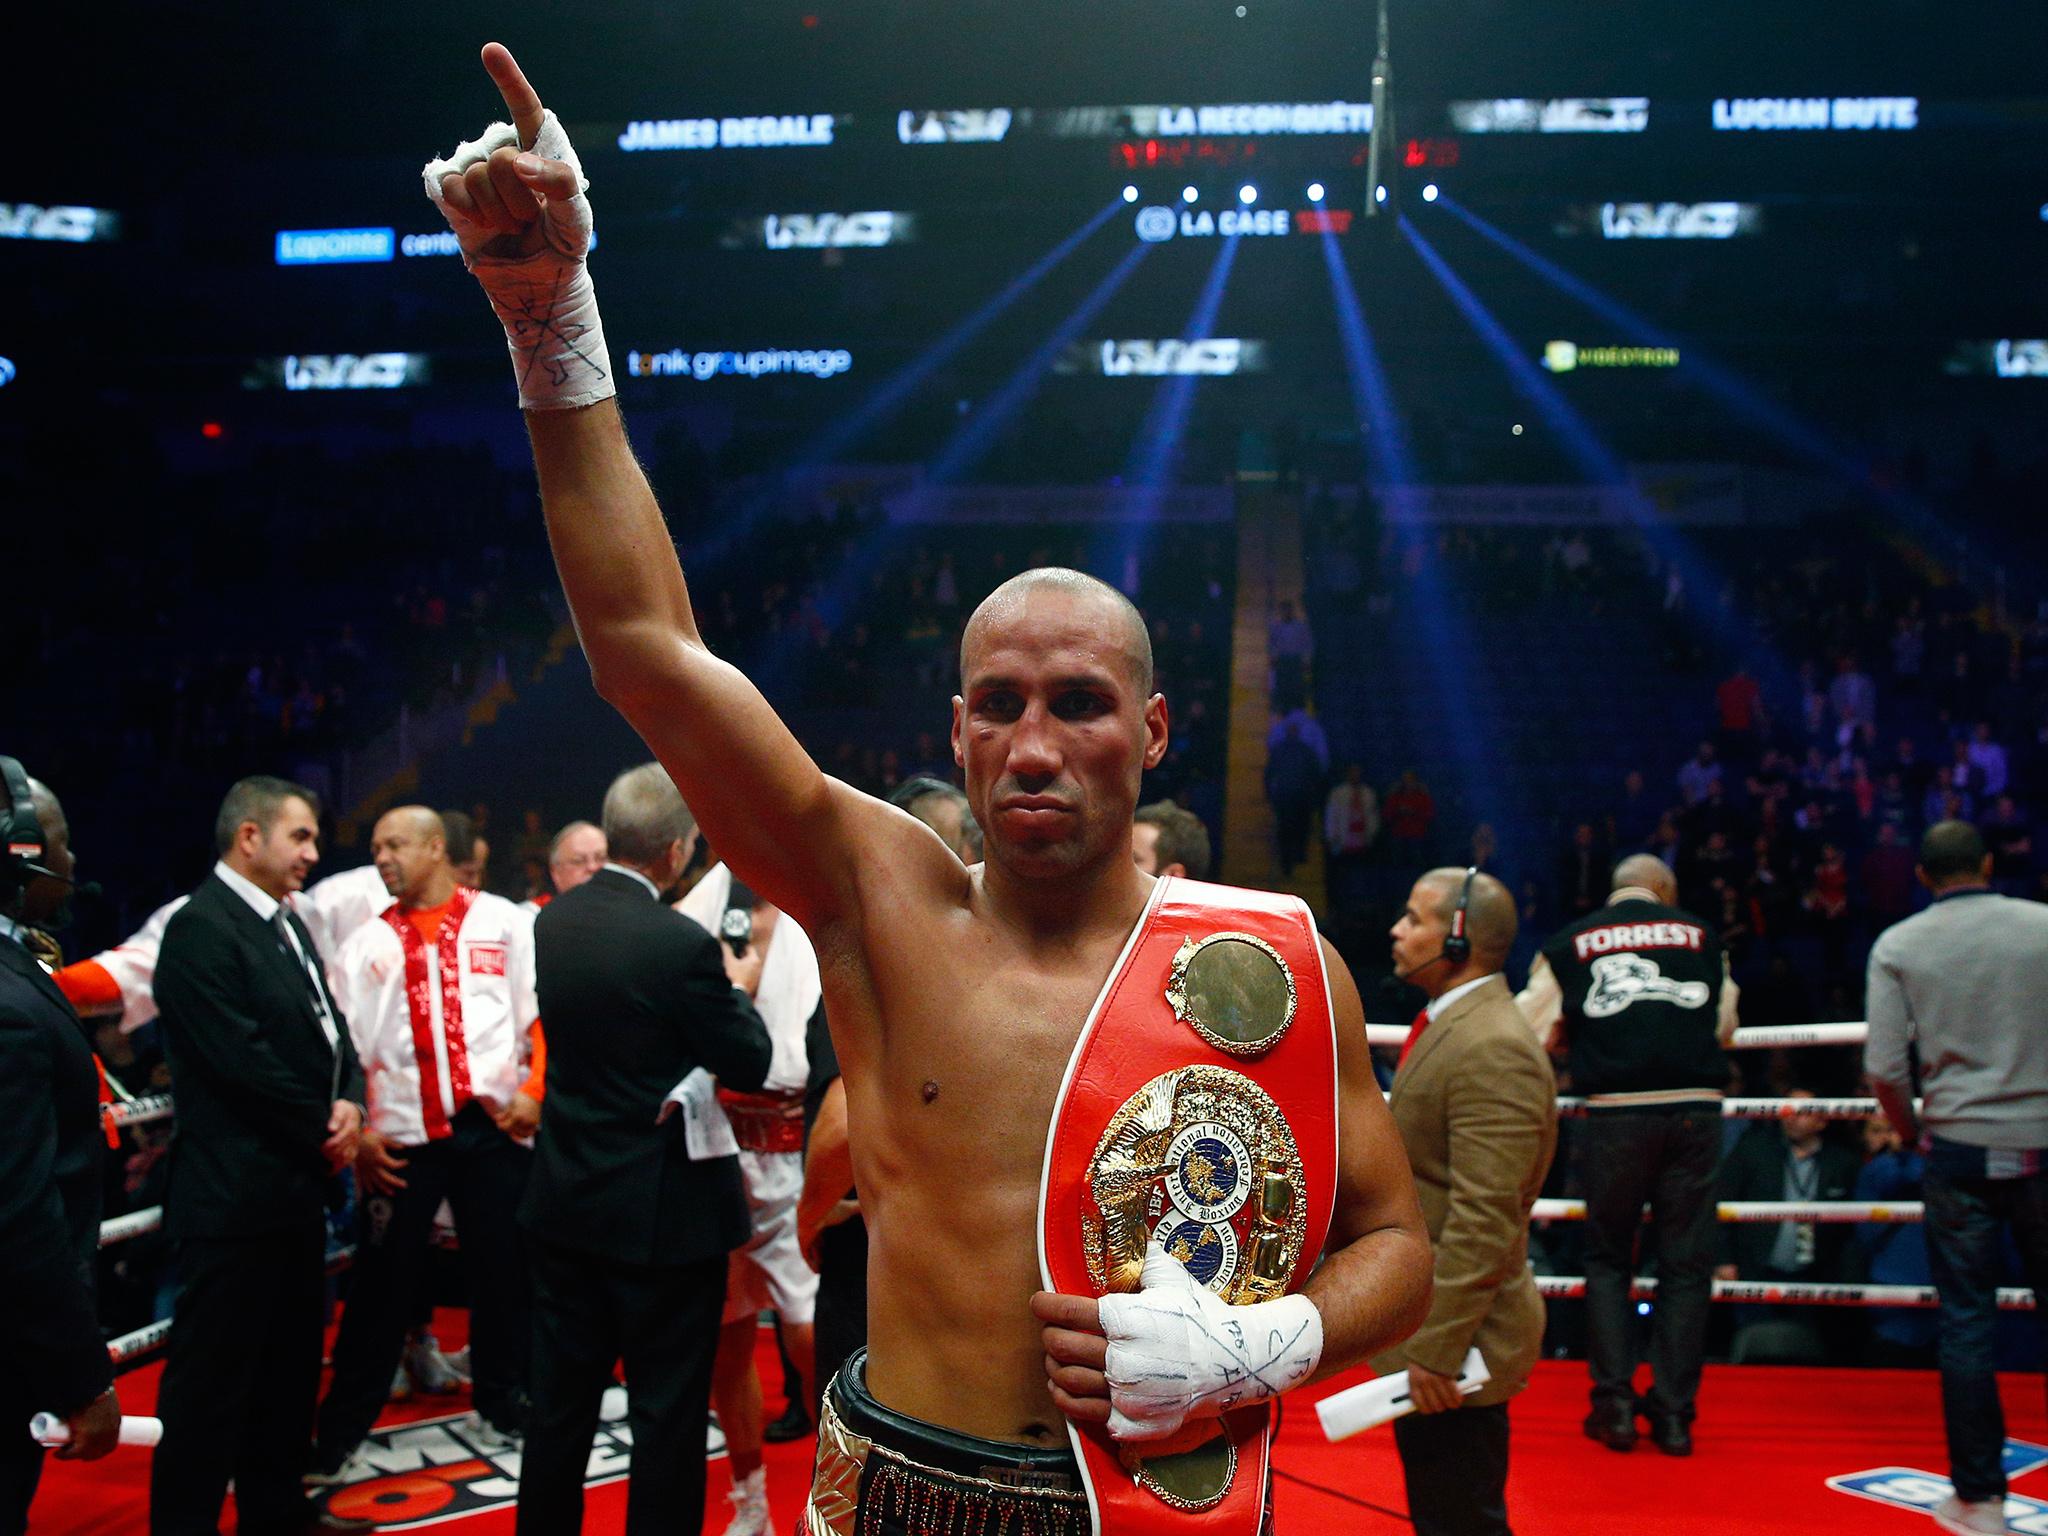 Eubank's step up to super middleweight puts him on a collision course with DeGale and Groves